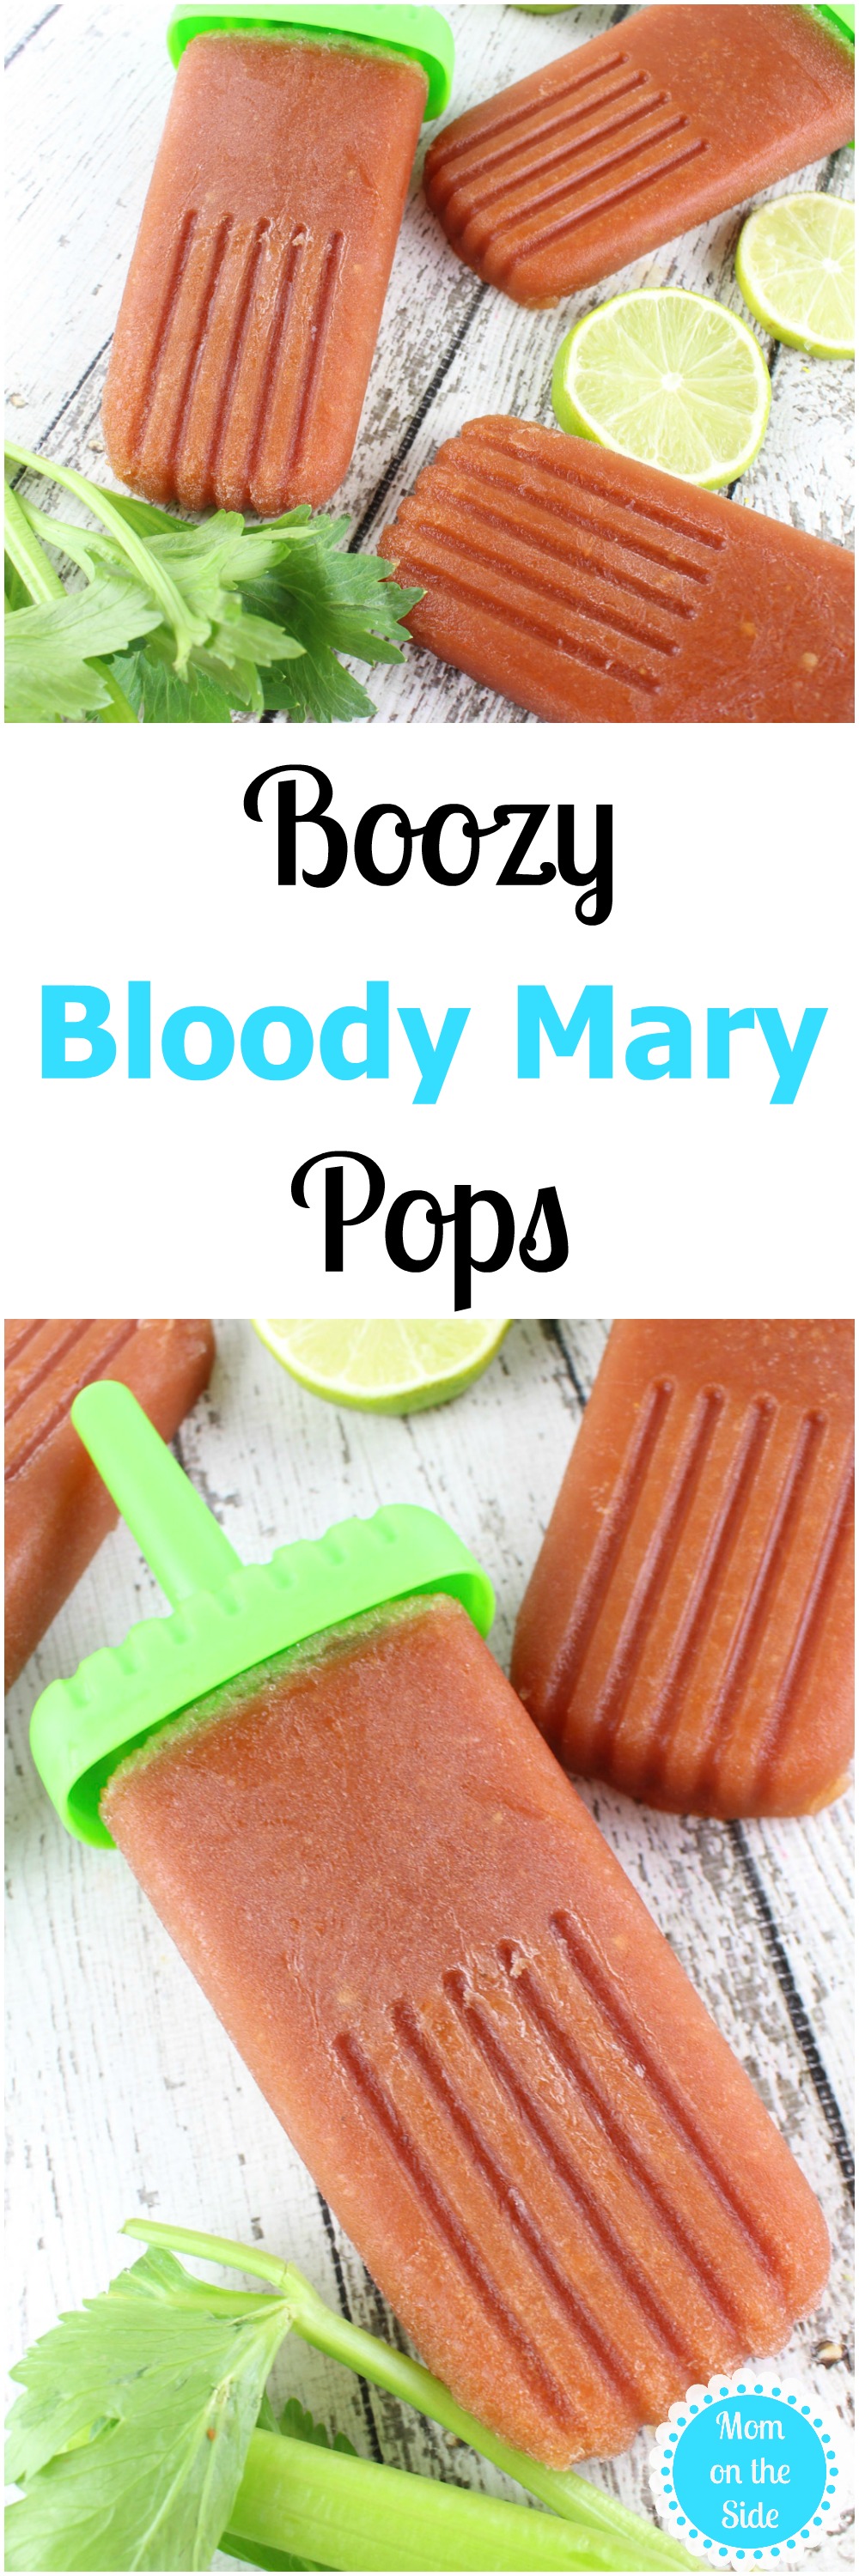 Boozy Bloody Mary Pops are a delicious adult cocktail popsicle!